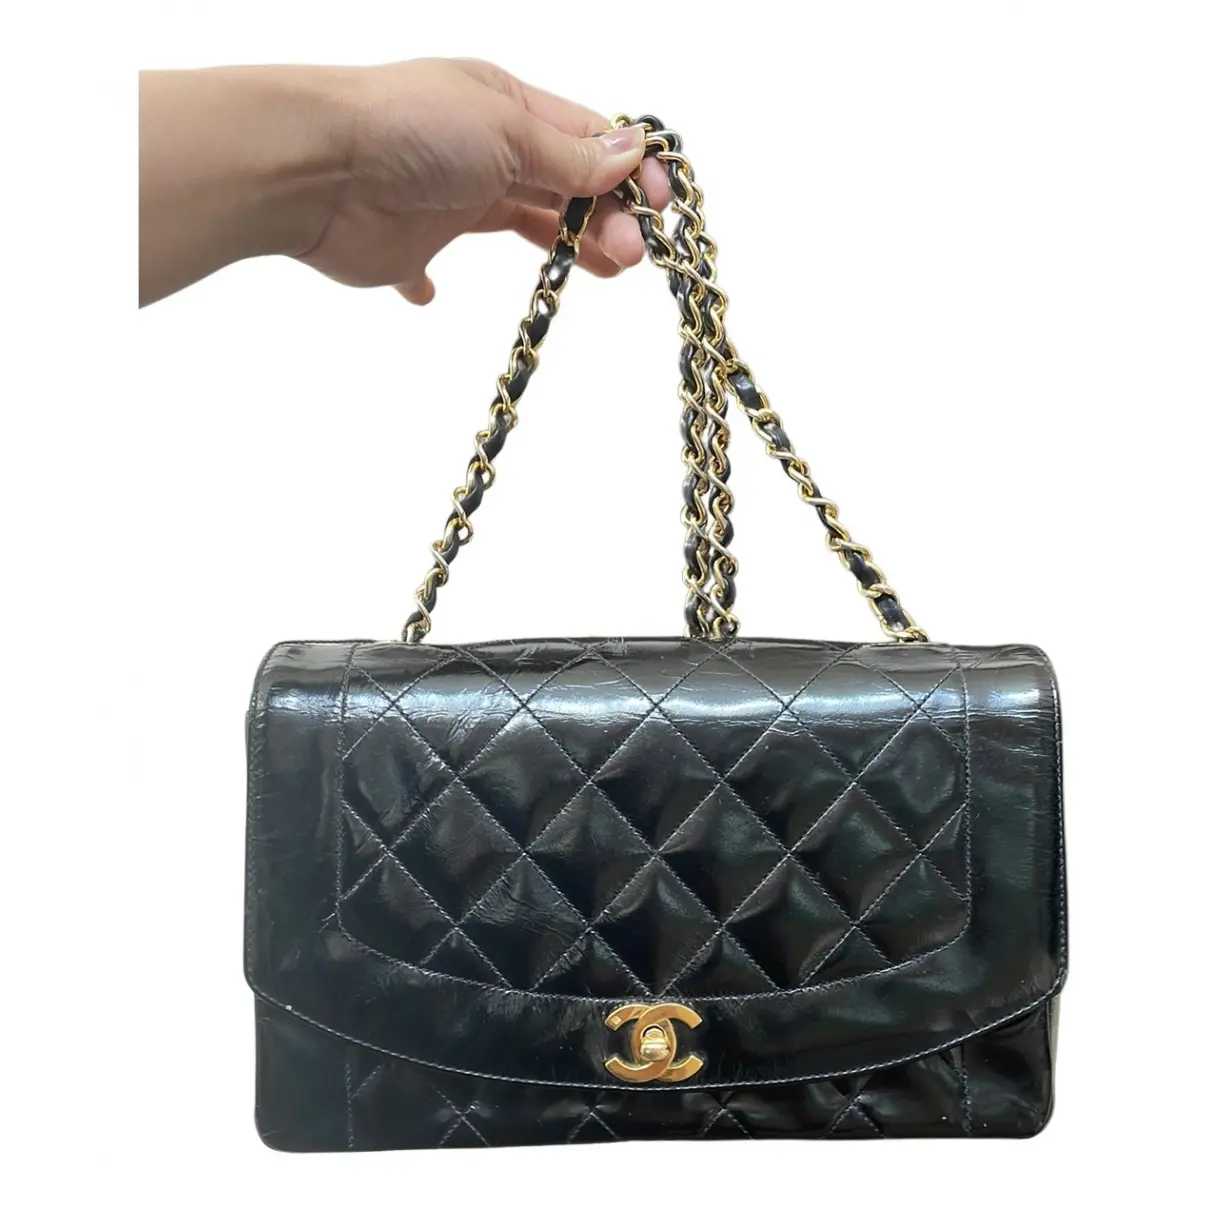 Buy Chanel Diana patent leather crossbody bag online - Vintage